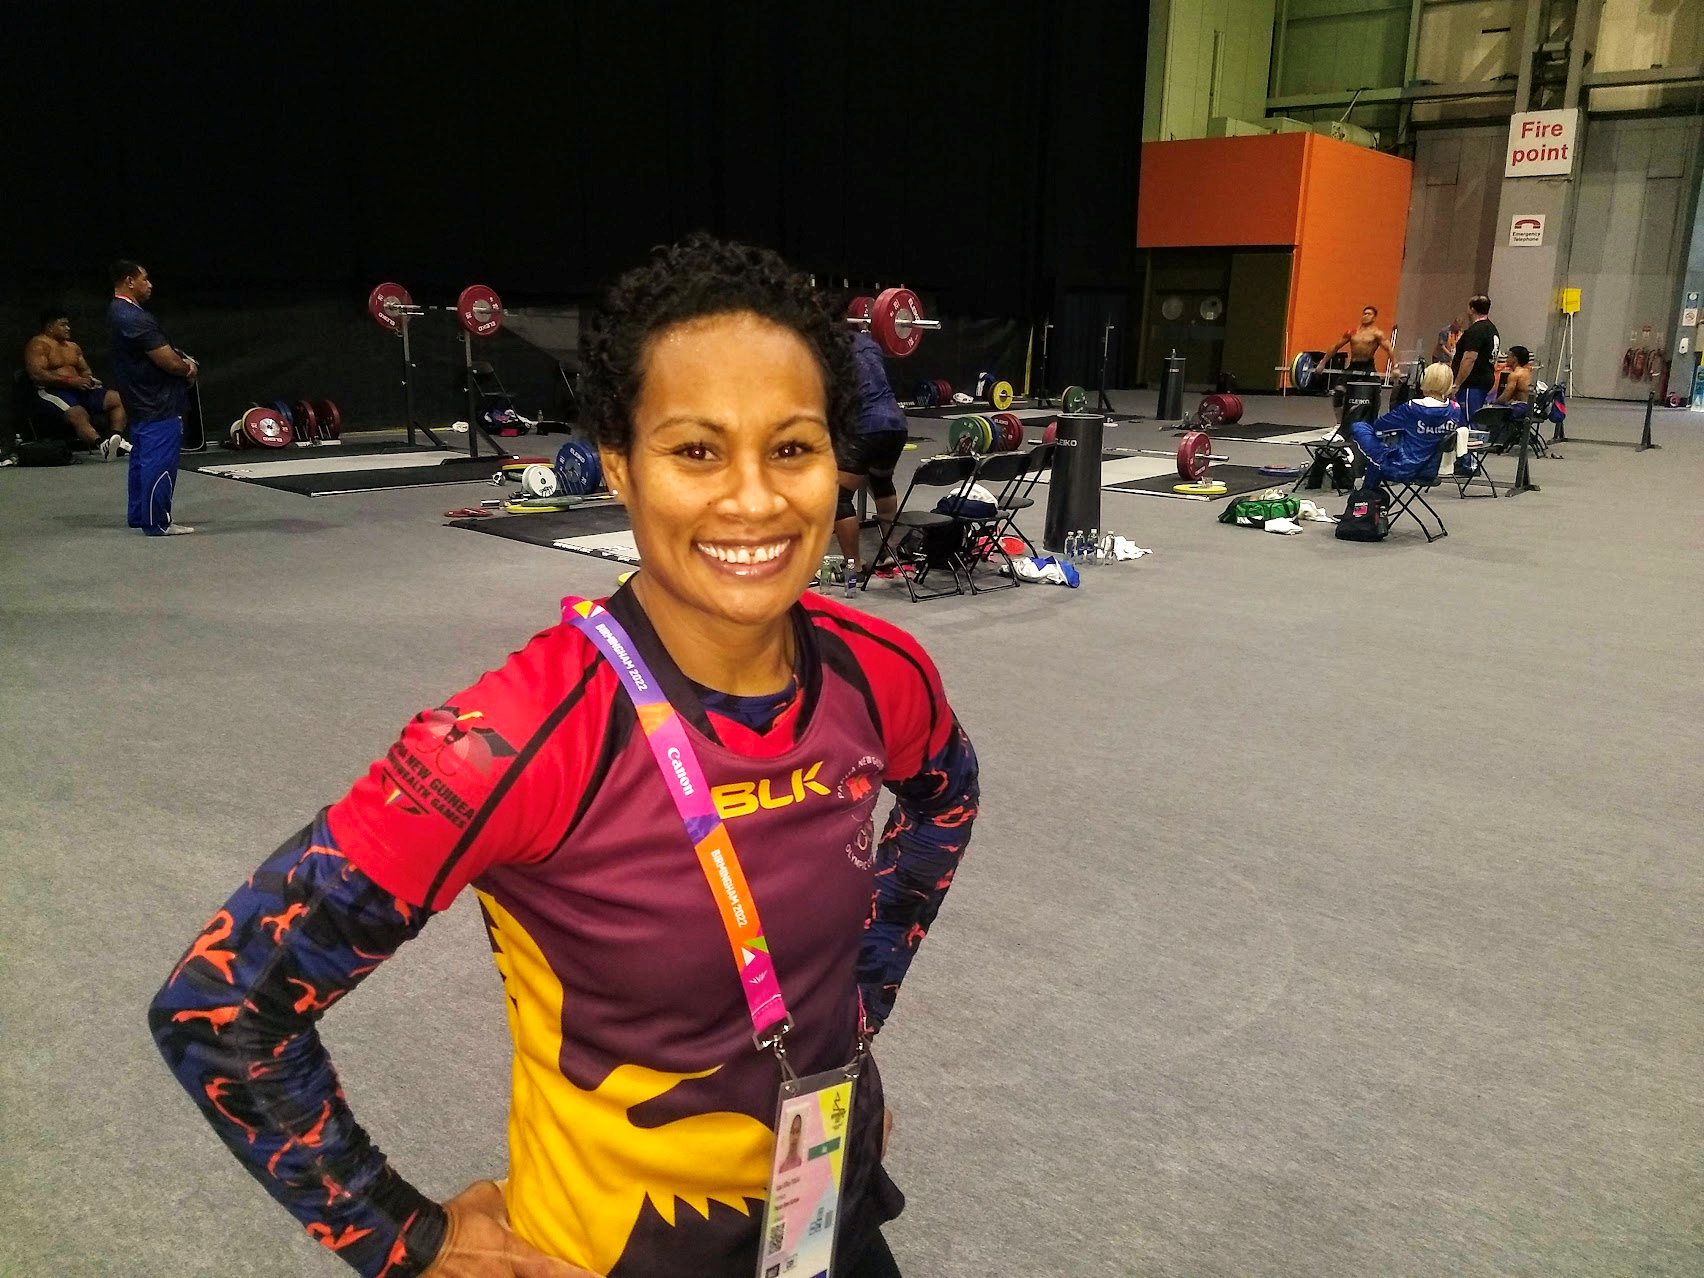 Papua New Guinea weightlifter Toua eyeing a record-breaking sixth Olympic Games in Paris after Birmingham 2022